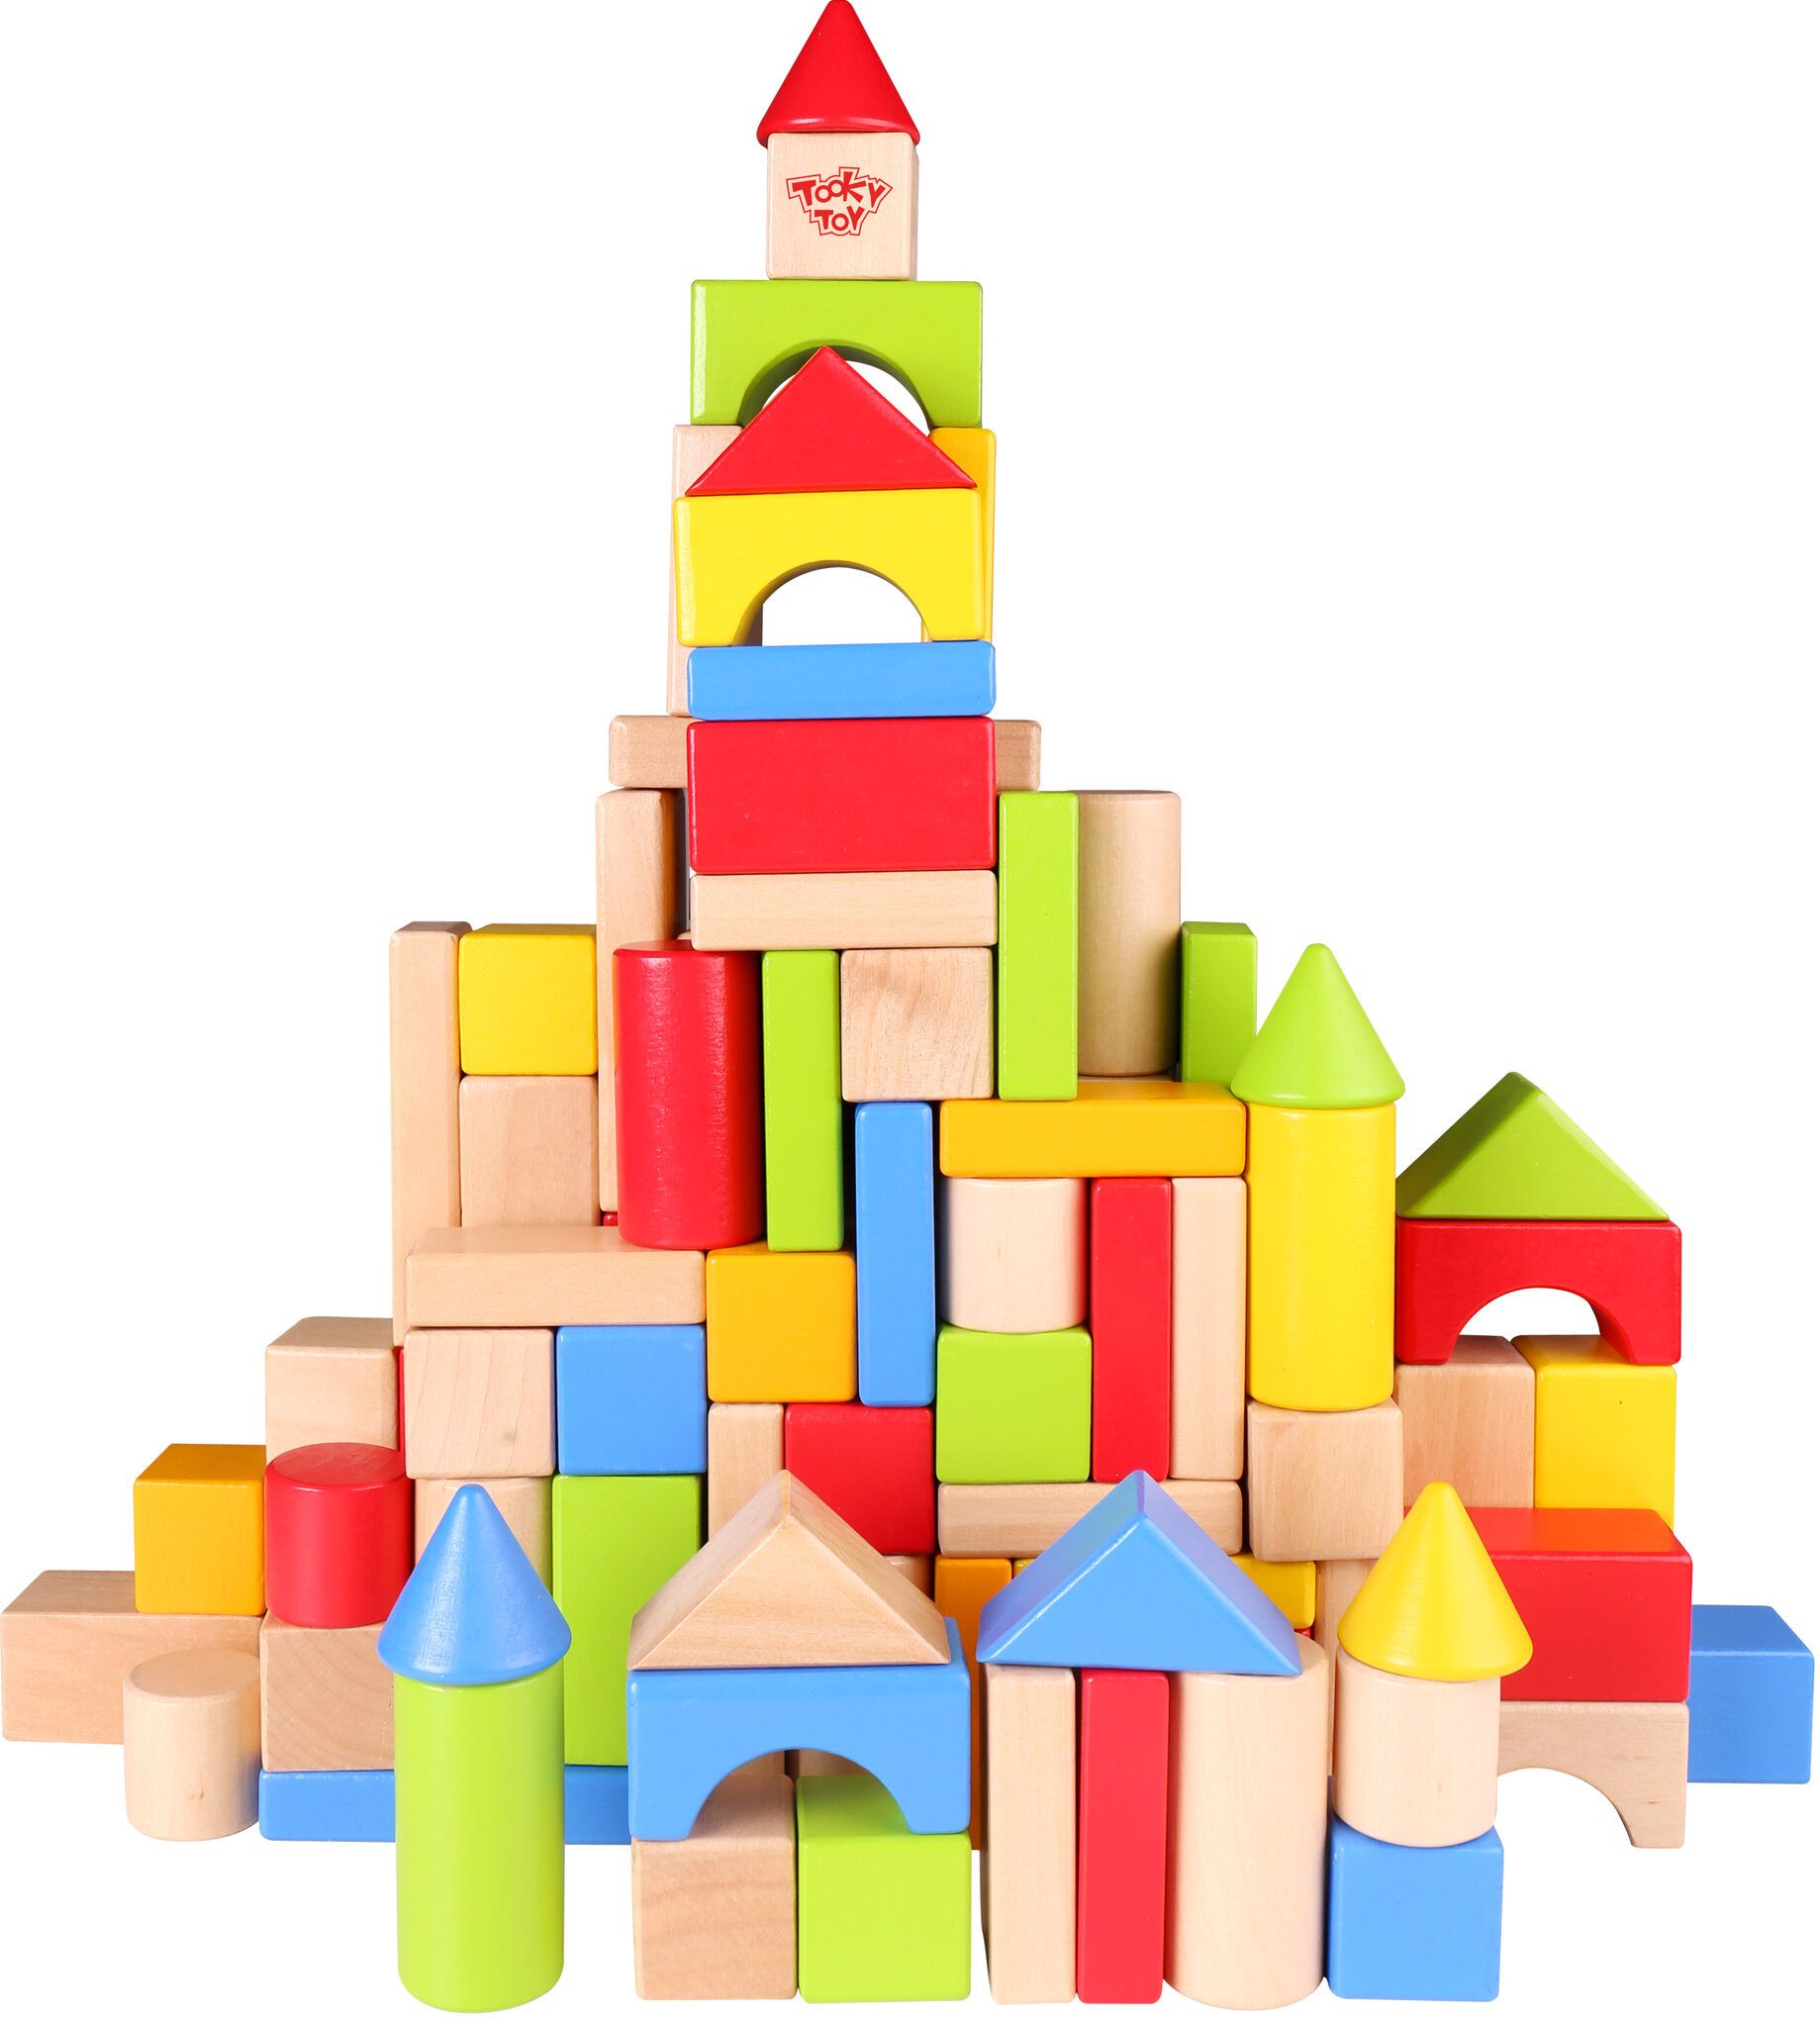 wooden blocks for engineering skills in children - wooden construction blocks for children - shop wooden playsets tooky toys